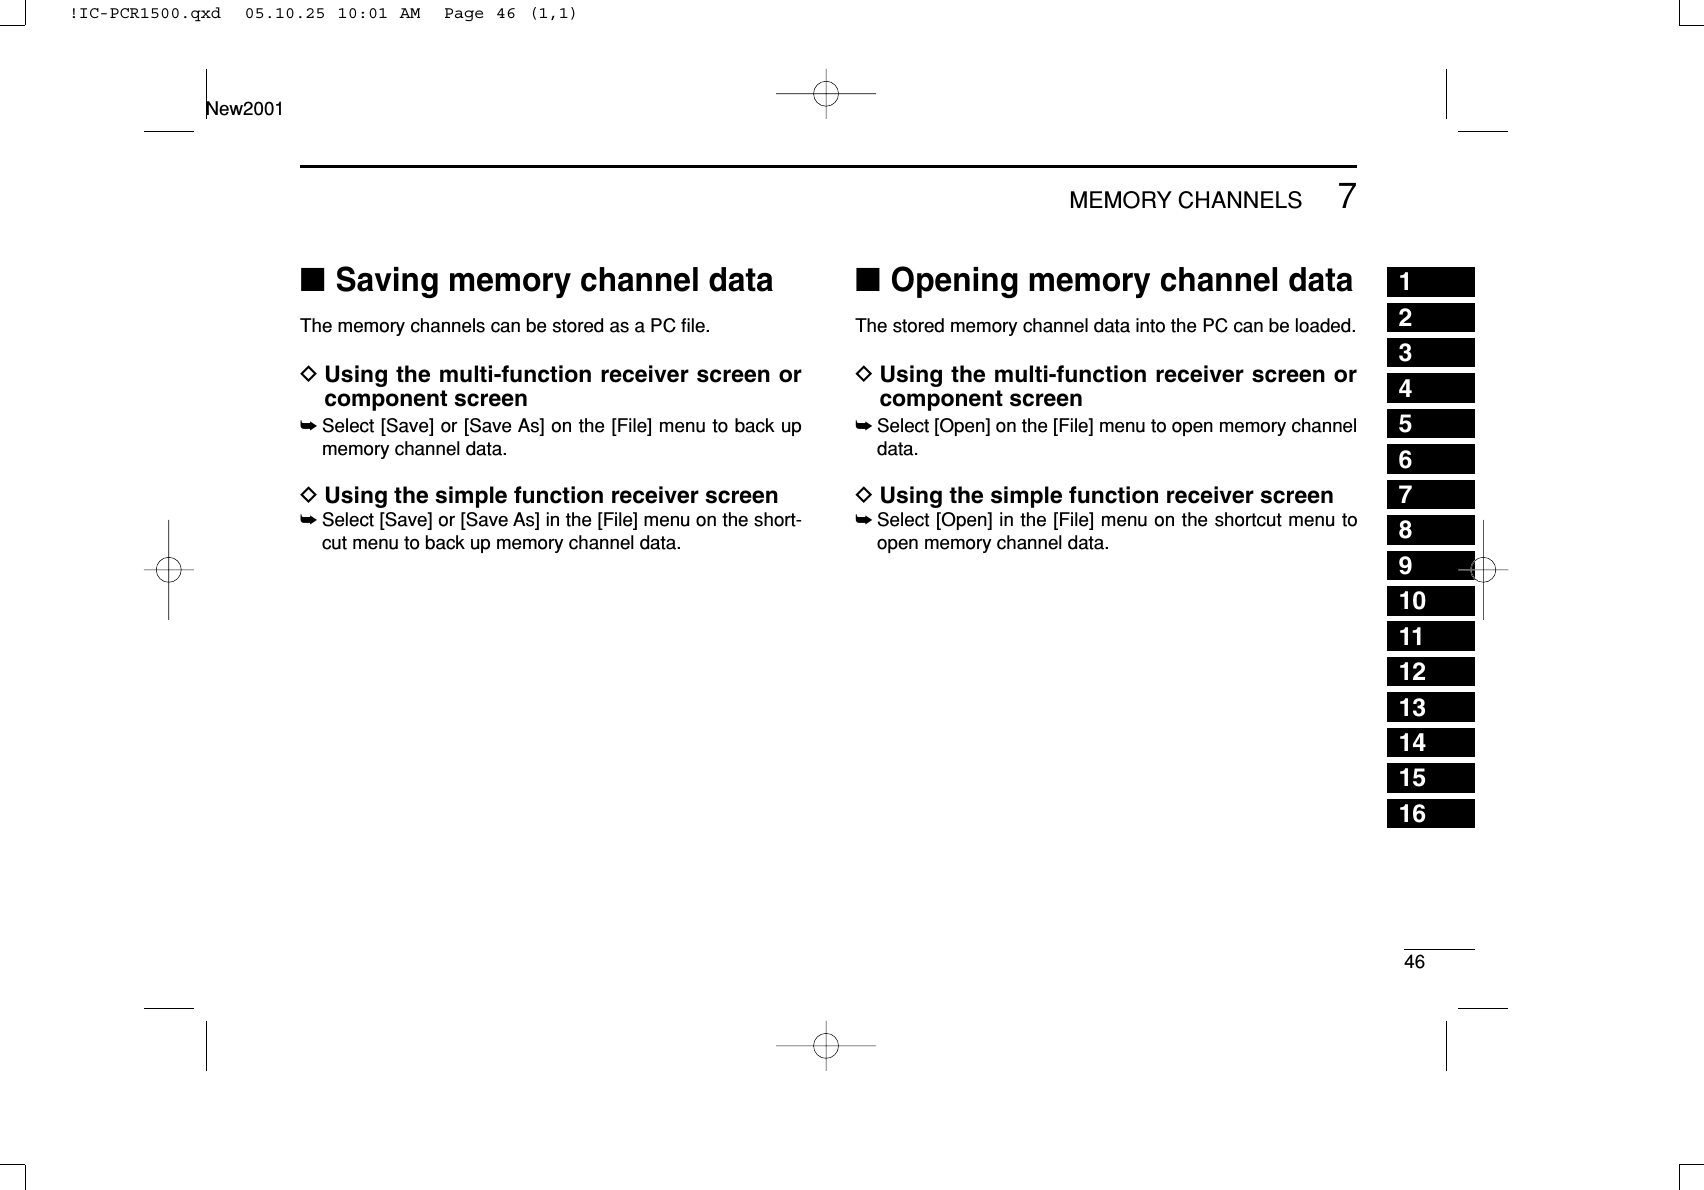 467MEMORY CHANNELSNew200112345678910111213141516■Saving memory channel dataThe memory channels can be stored as a PC ﬁle.DUsing the multi-function receiver screen orcomponent screen➥Select [Save] or [Save As] on the [File] menu to back upmemory channel data.DUsing the simple function receiver screen➥Select [Save] or [Save As] in the [File] menu on the short-cut menu to back up memory channel data.■Opening memory channel dataThe stored memory channel data into the PC can be loaded.DUsing the multi-function receiver screen orcomponent screen➥Select [Open] on the [File] menu to open memory channeldata.DUsing the simple function receiver screen➥Select [Open] in the [File] menu on the shortcut menu toopen memory channel data.!IC-PCR1500.qxd  05.10.25 10:01 AM  Page 46 (1,1)